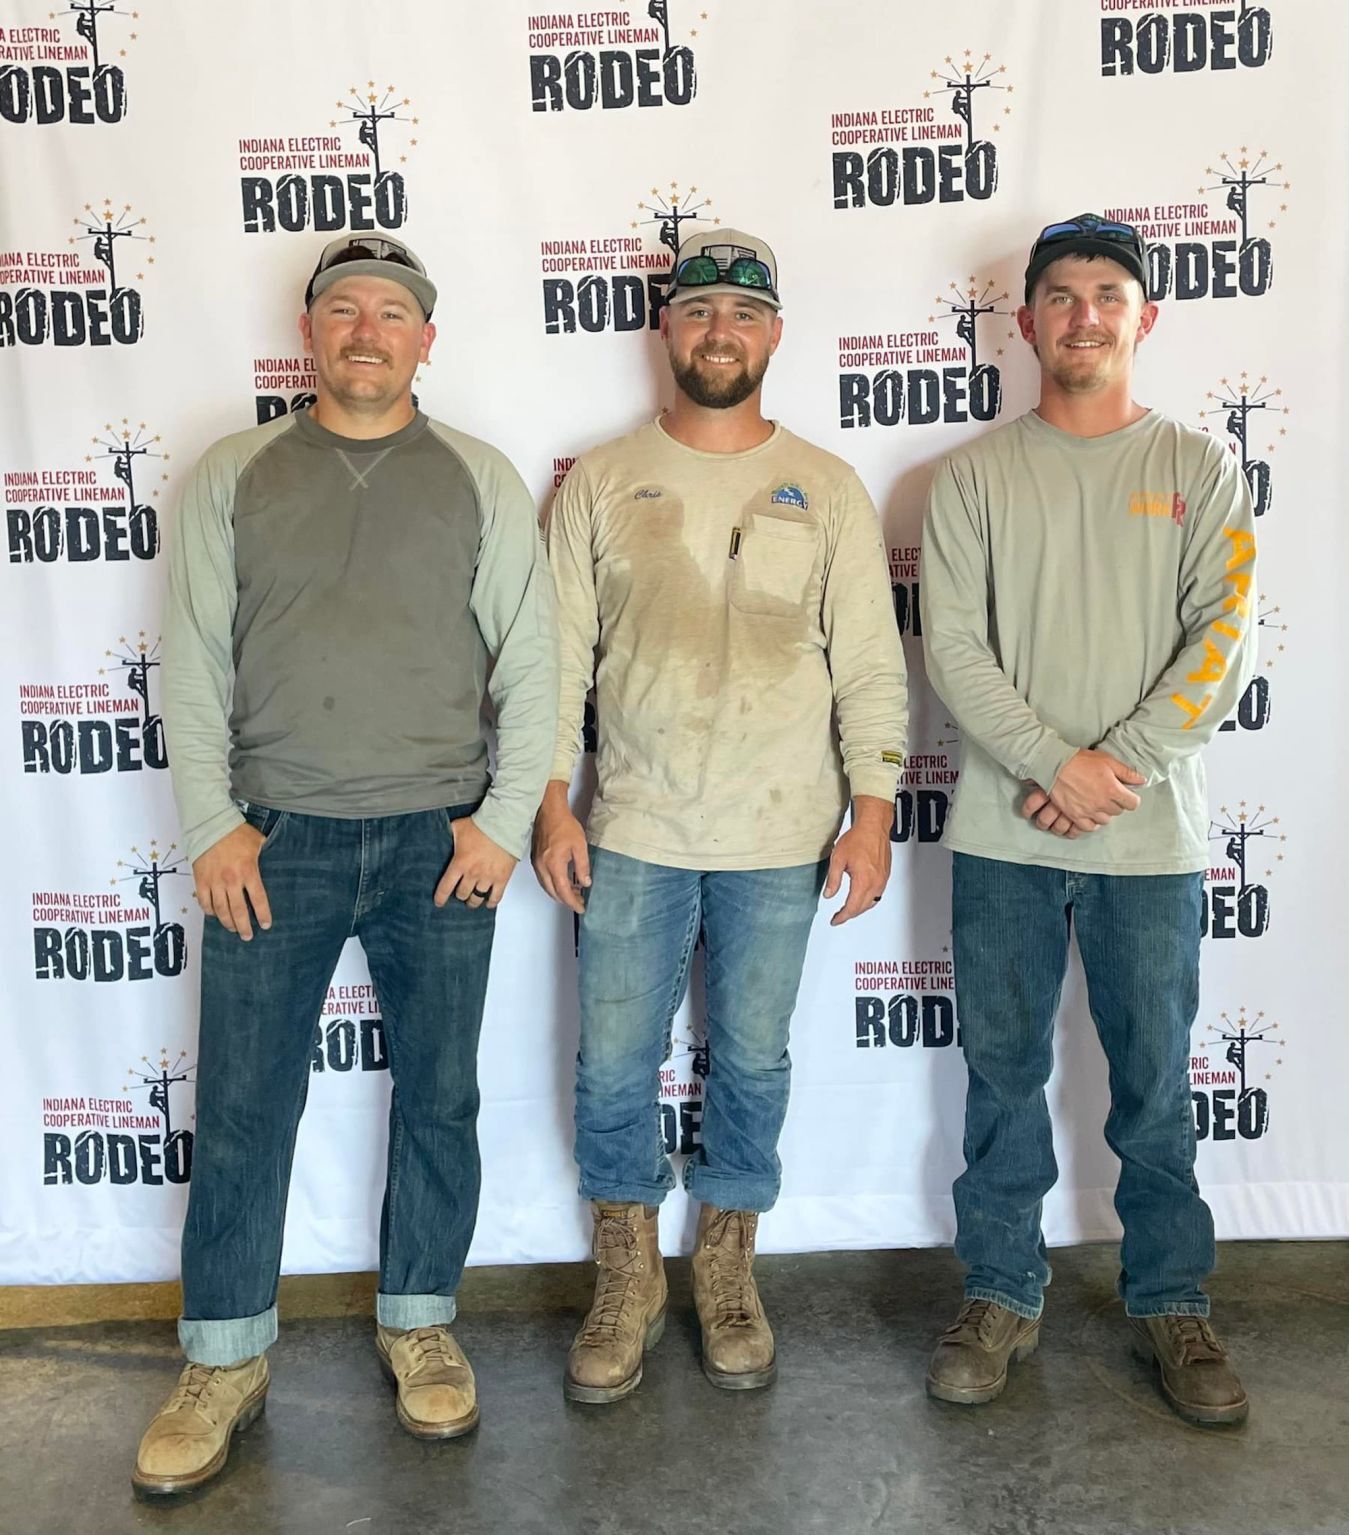 RushShelby Energy Apprentice Linemen Participate In Indiana Electric 